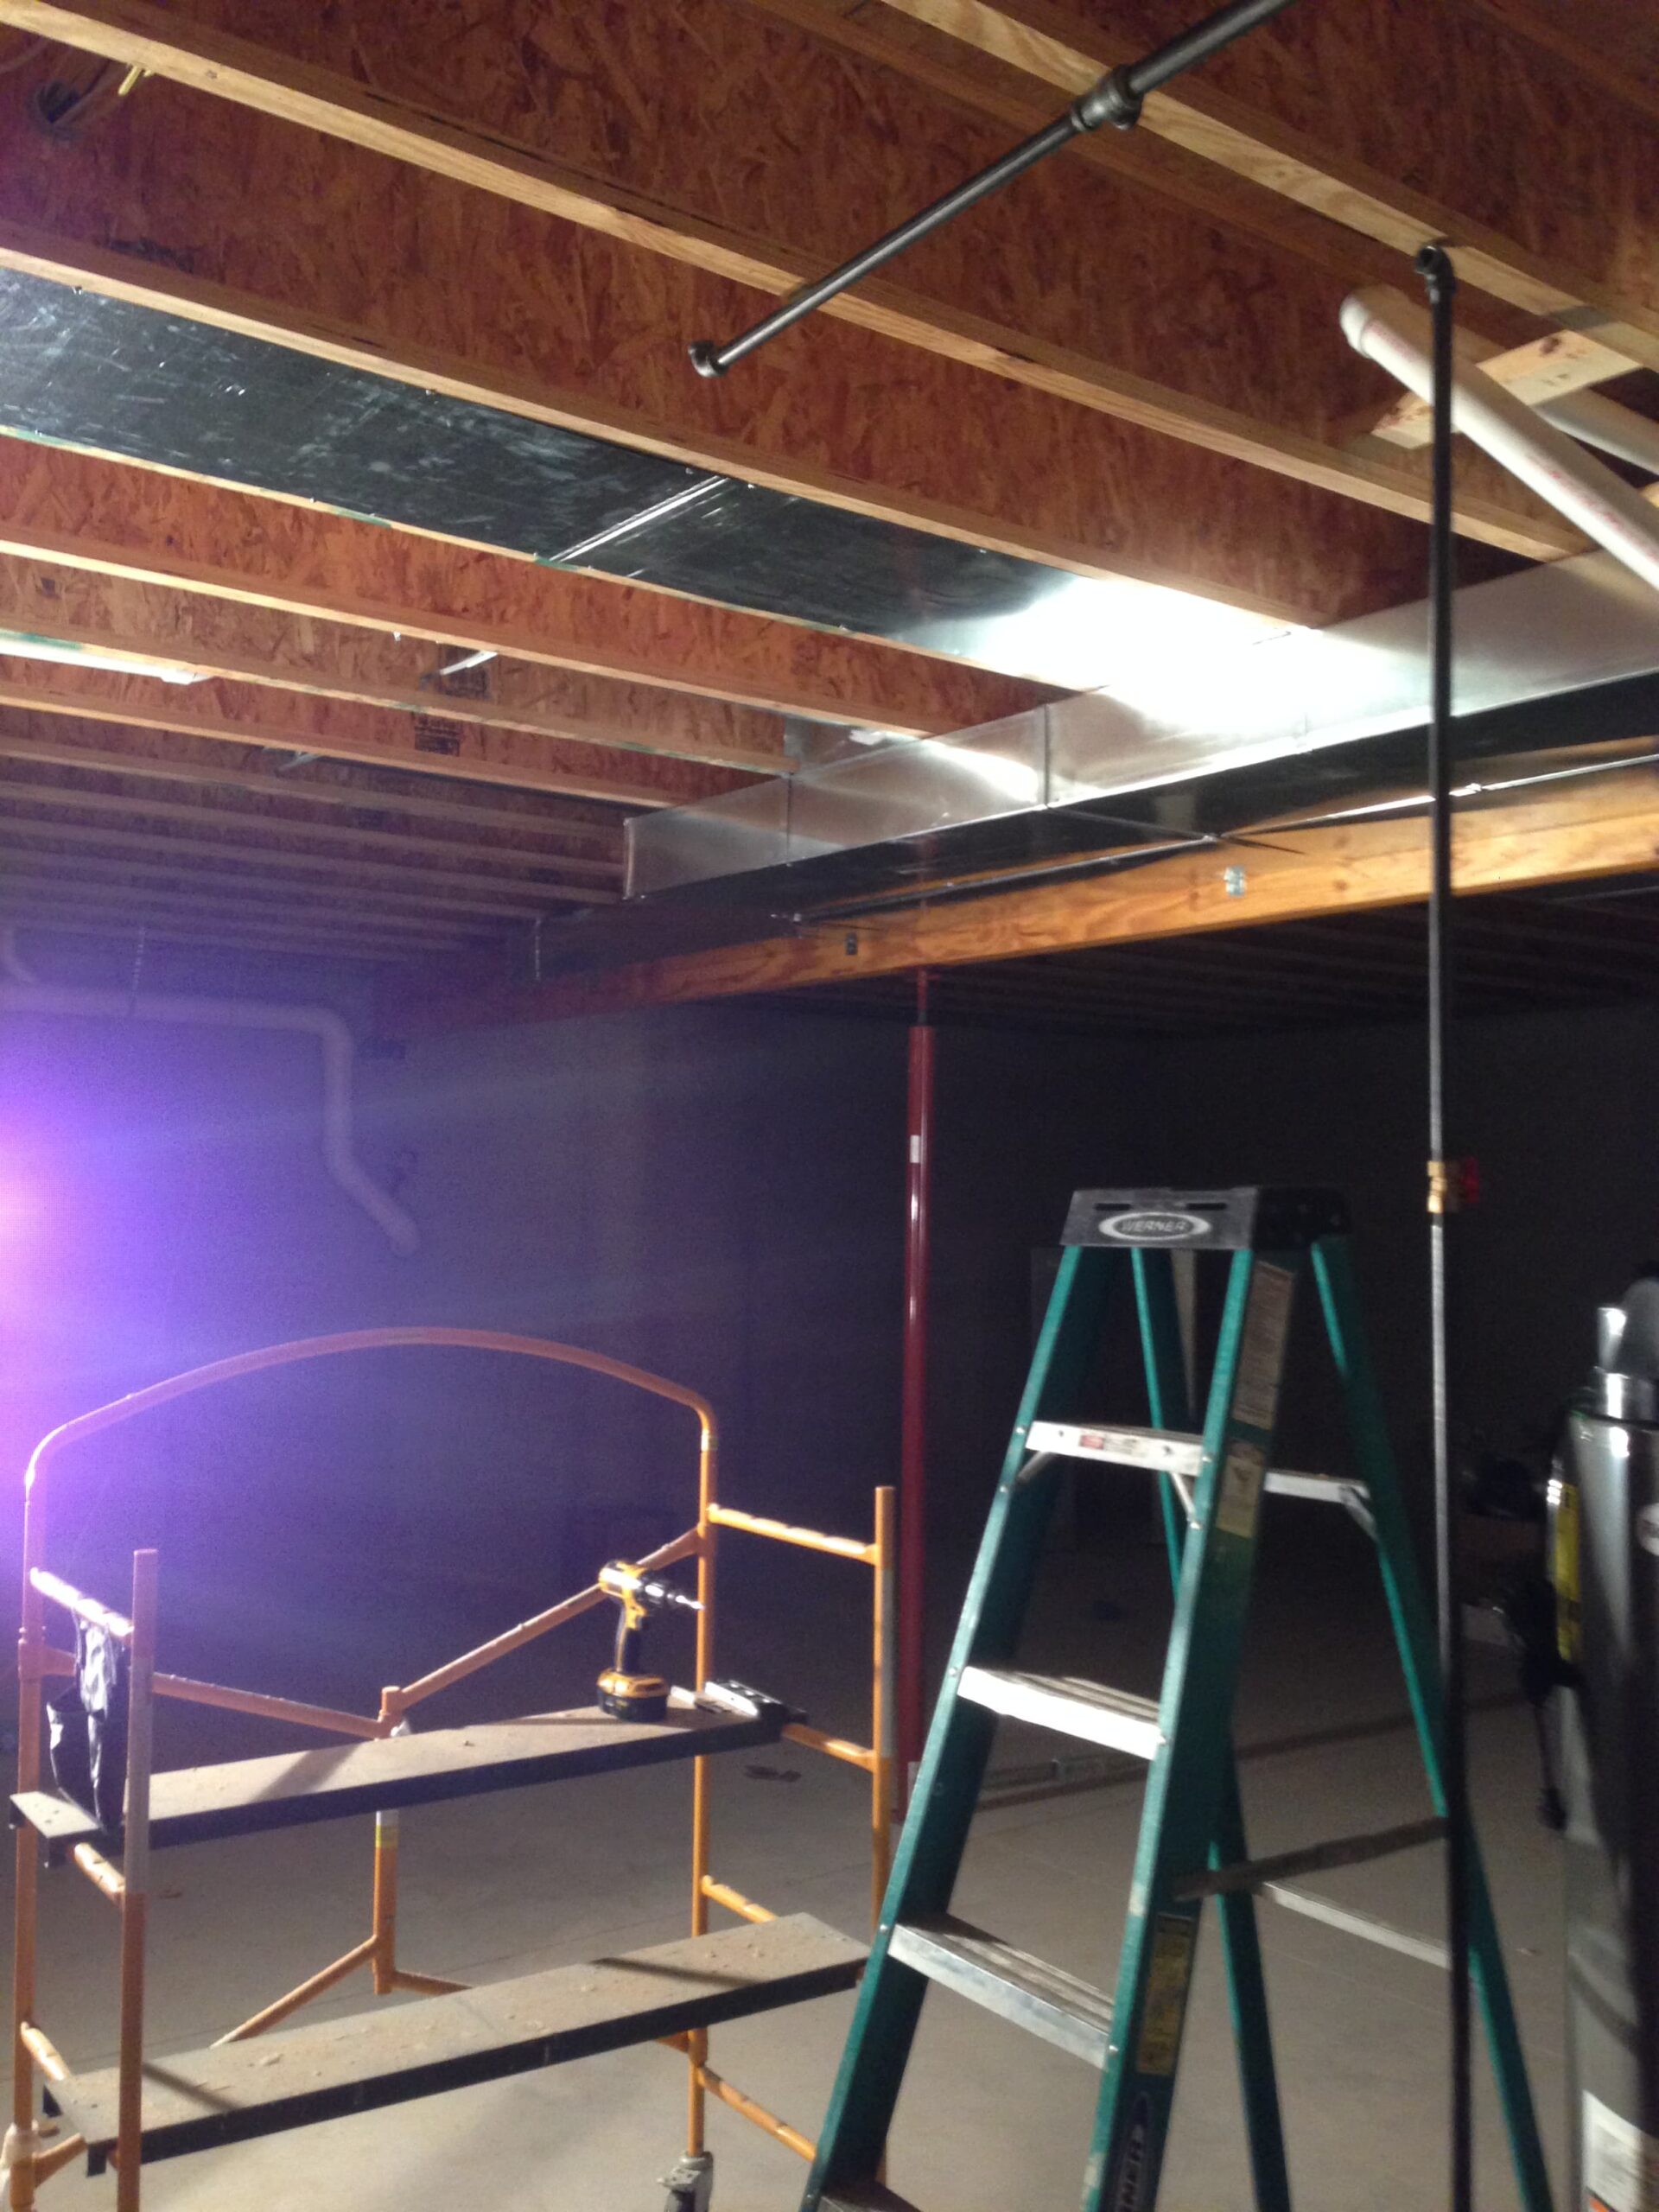 Basement with HVAC duct work